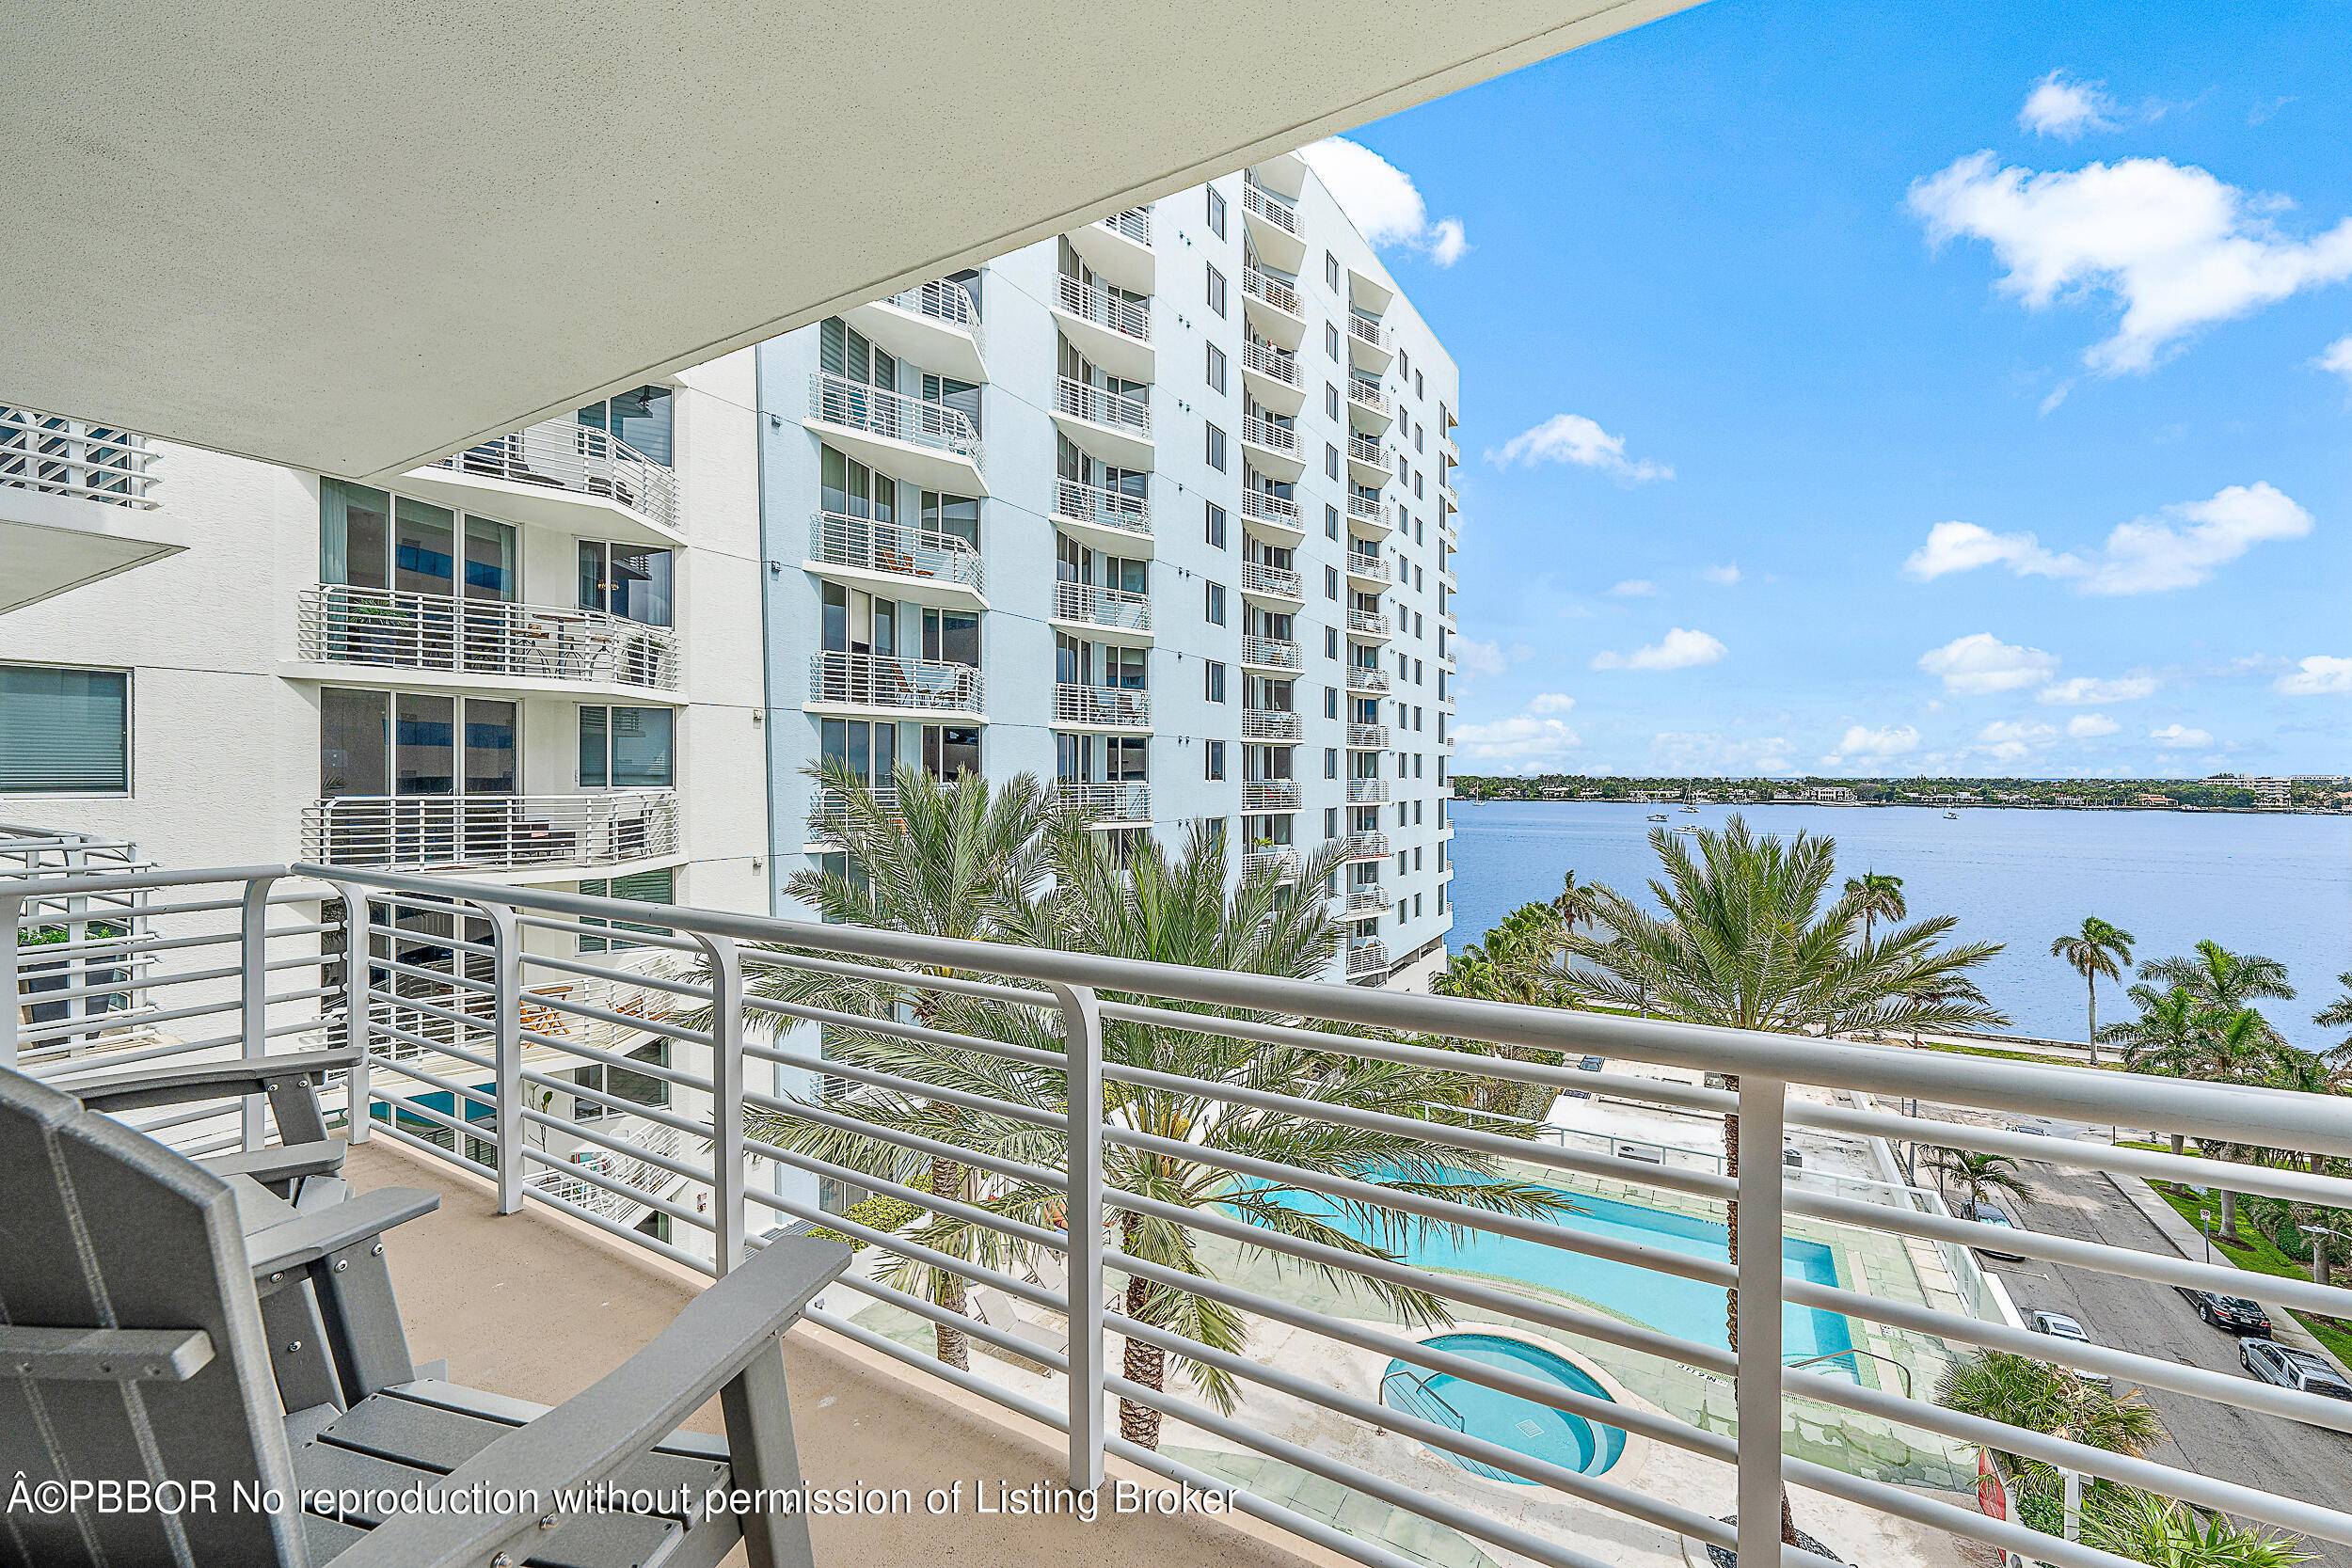 Views of Palm Beach Island, the intracoastal, and the infinity pool welcome you home.